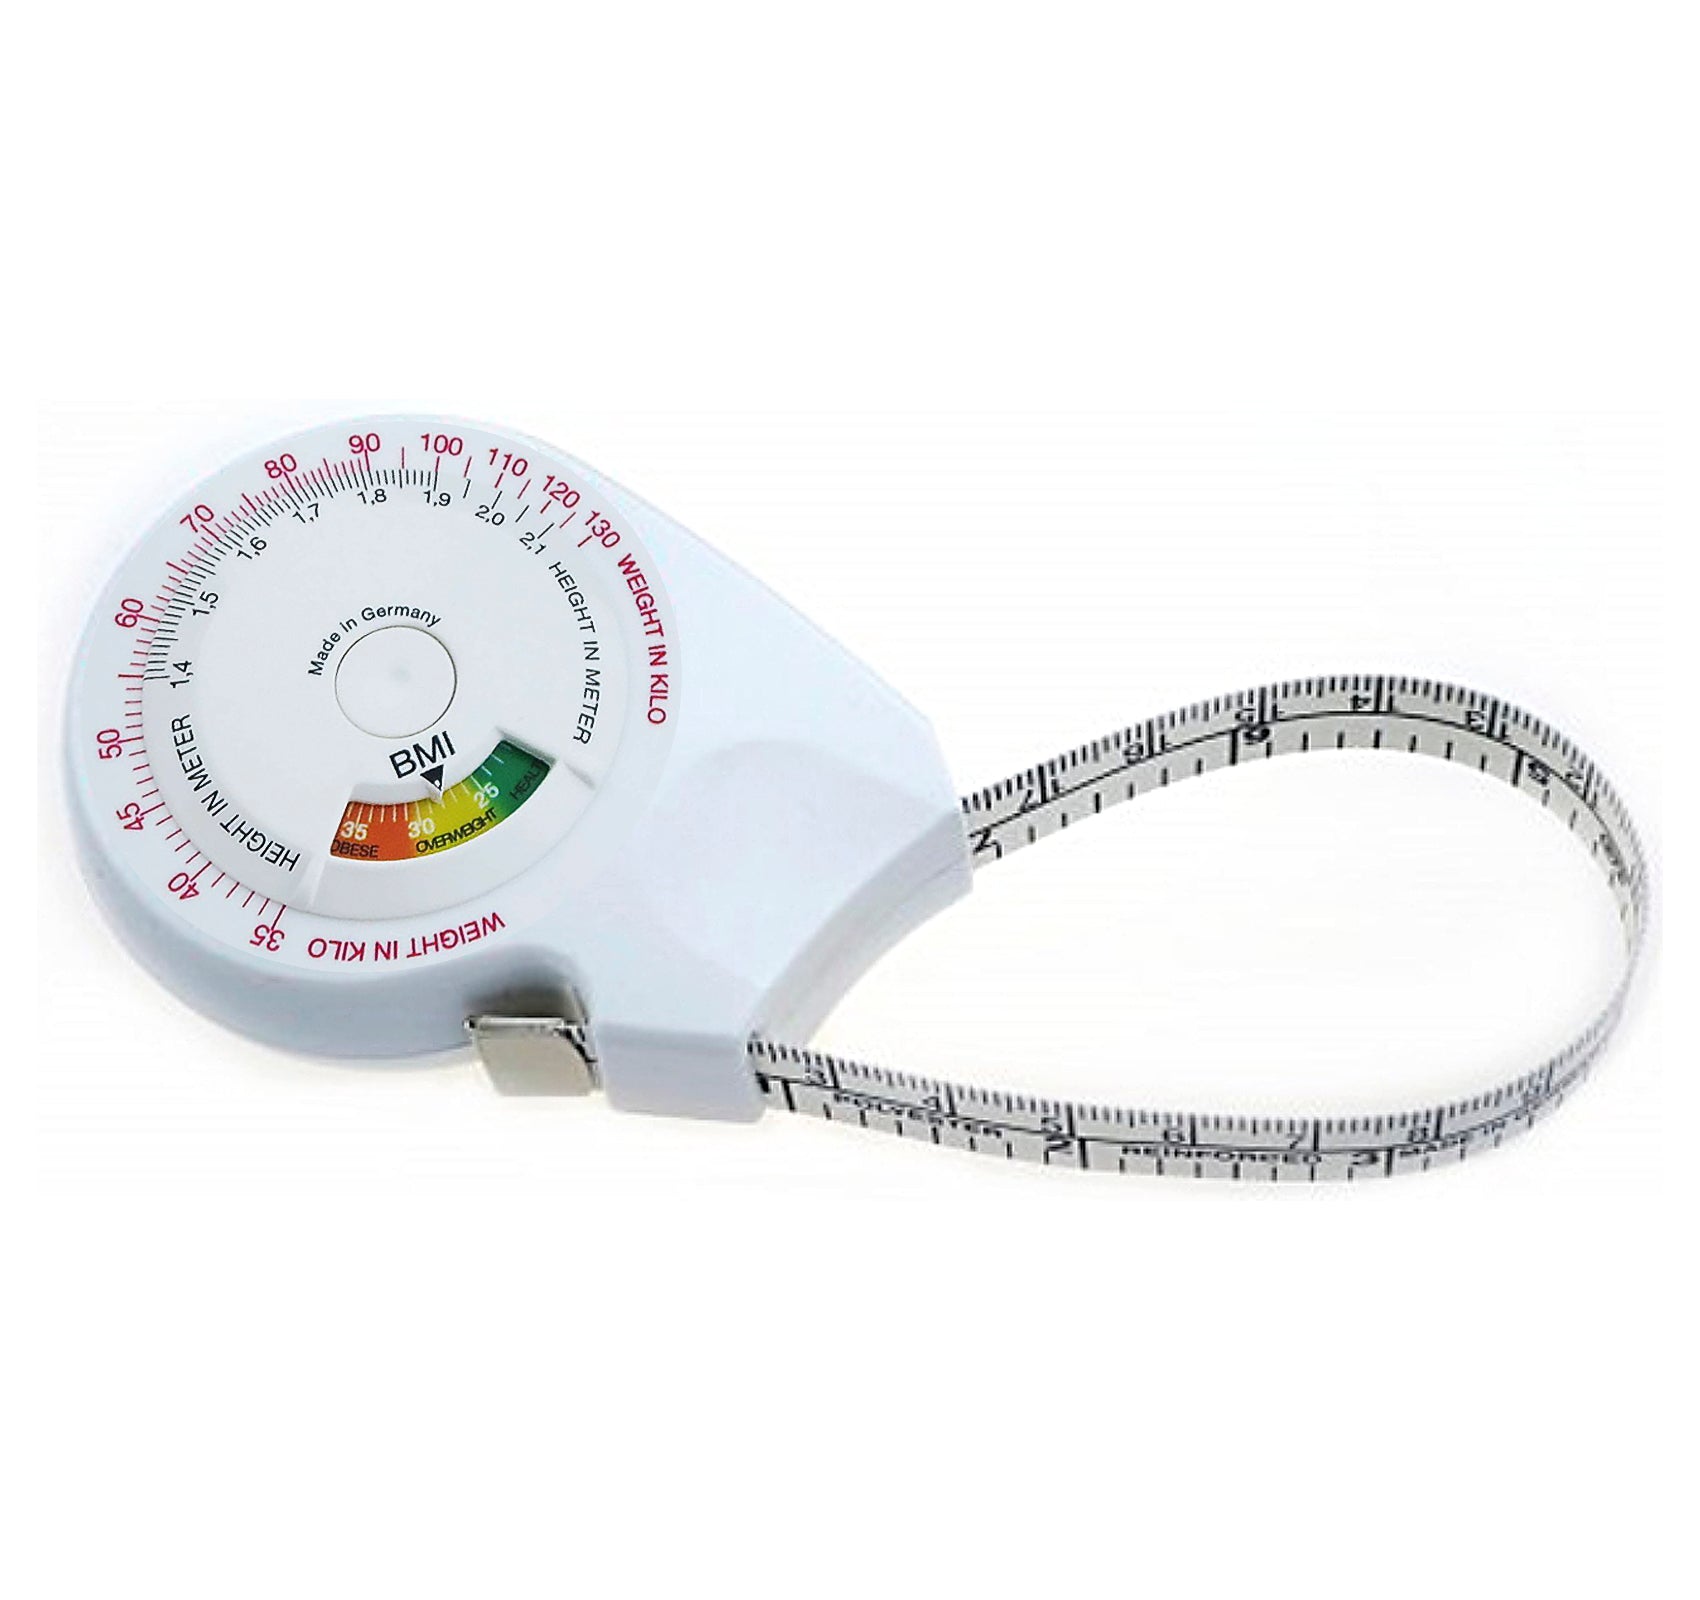 How to Take Body Measurements with an Anthropometric Tape Measure –  NutriActiva